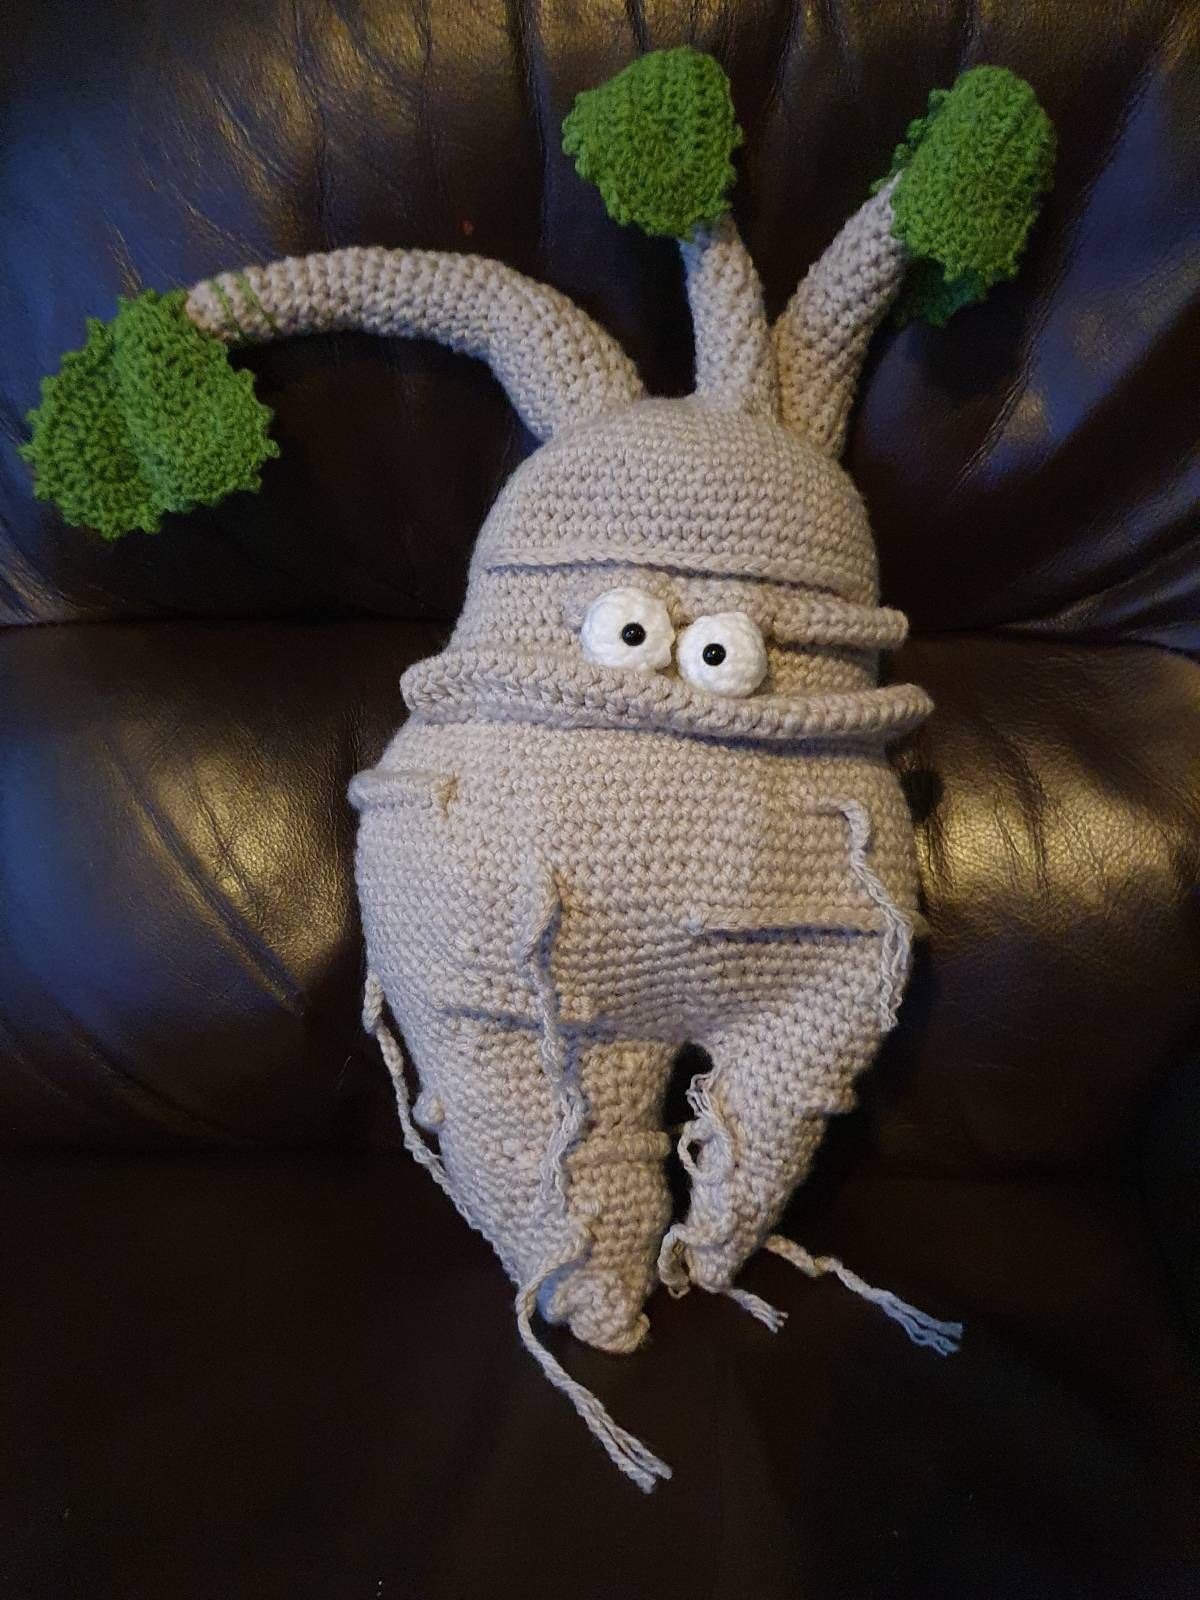 Amigurumi Mandrake Crochet Doll Review by rachelrandall1 for Cottontail Whiskers